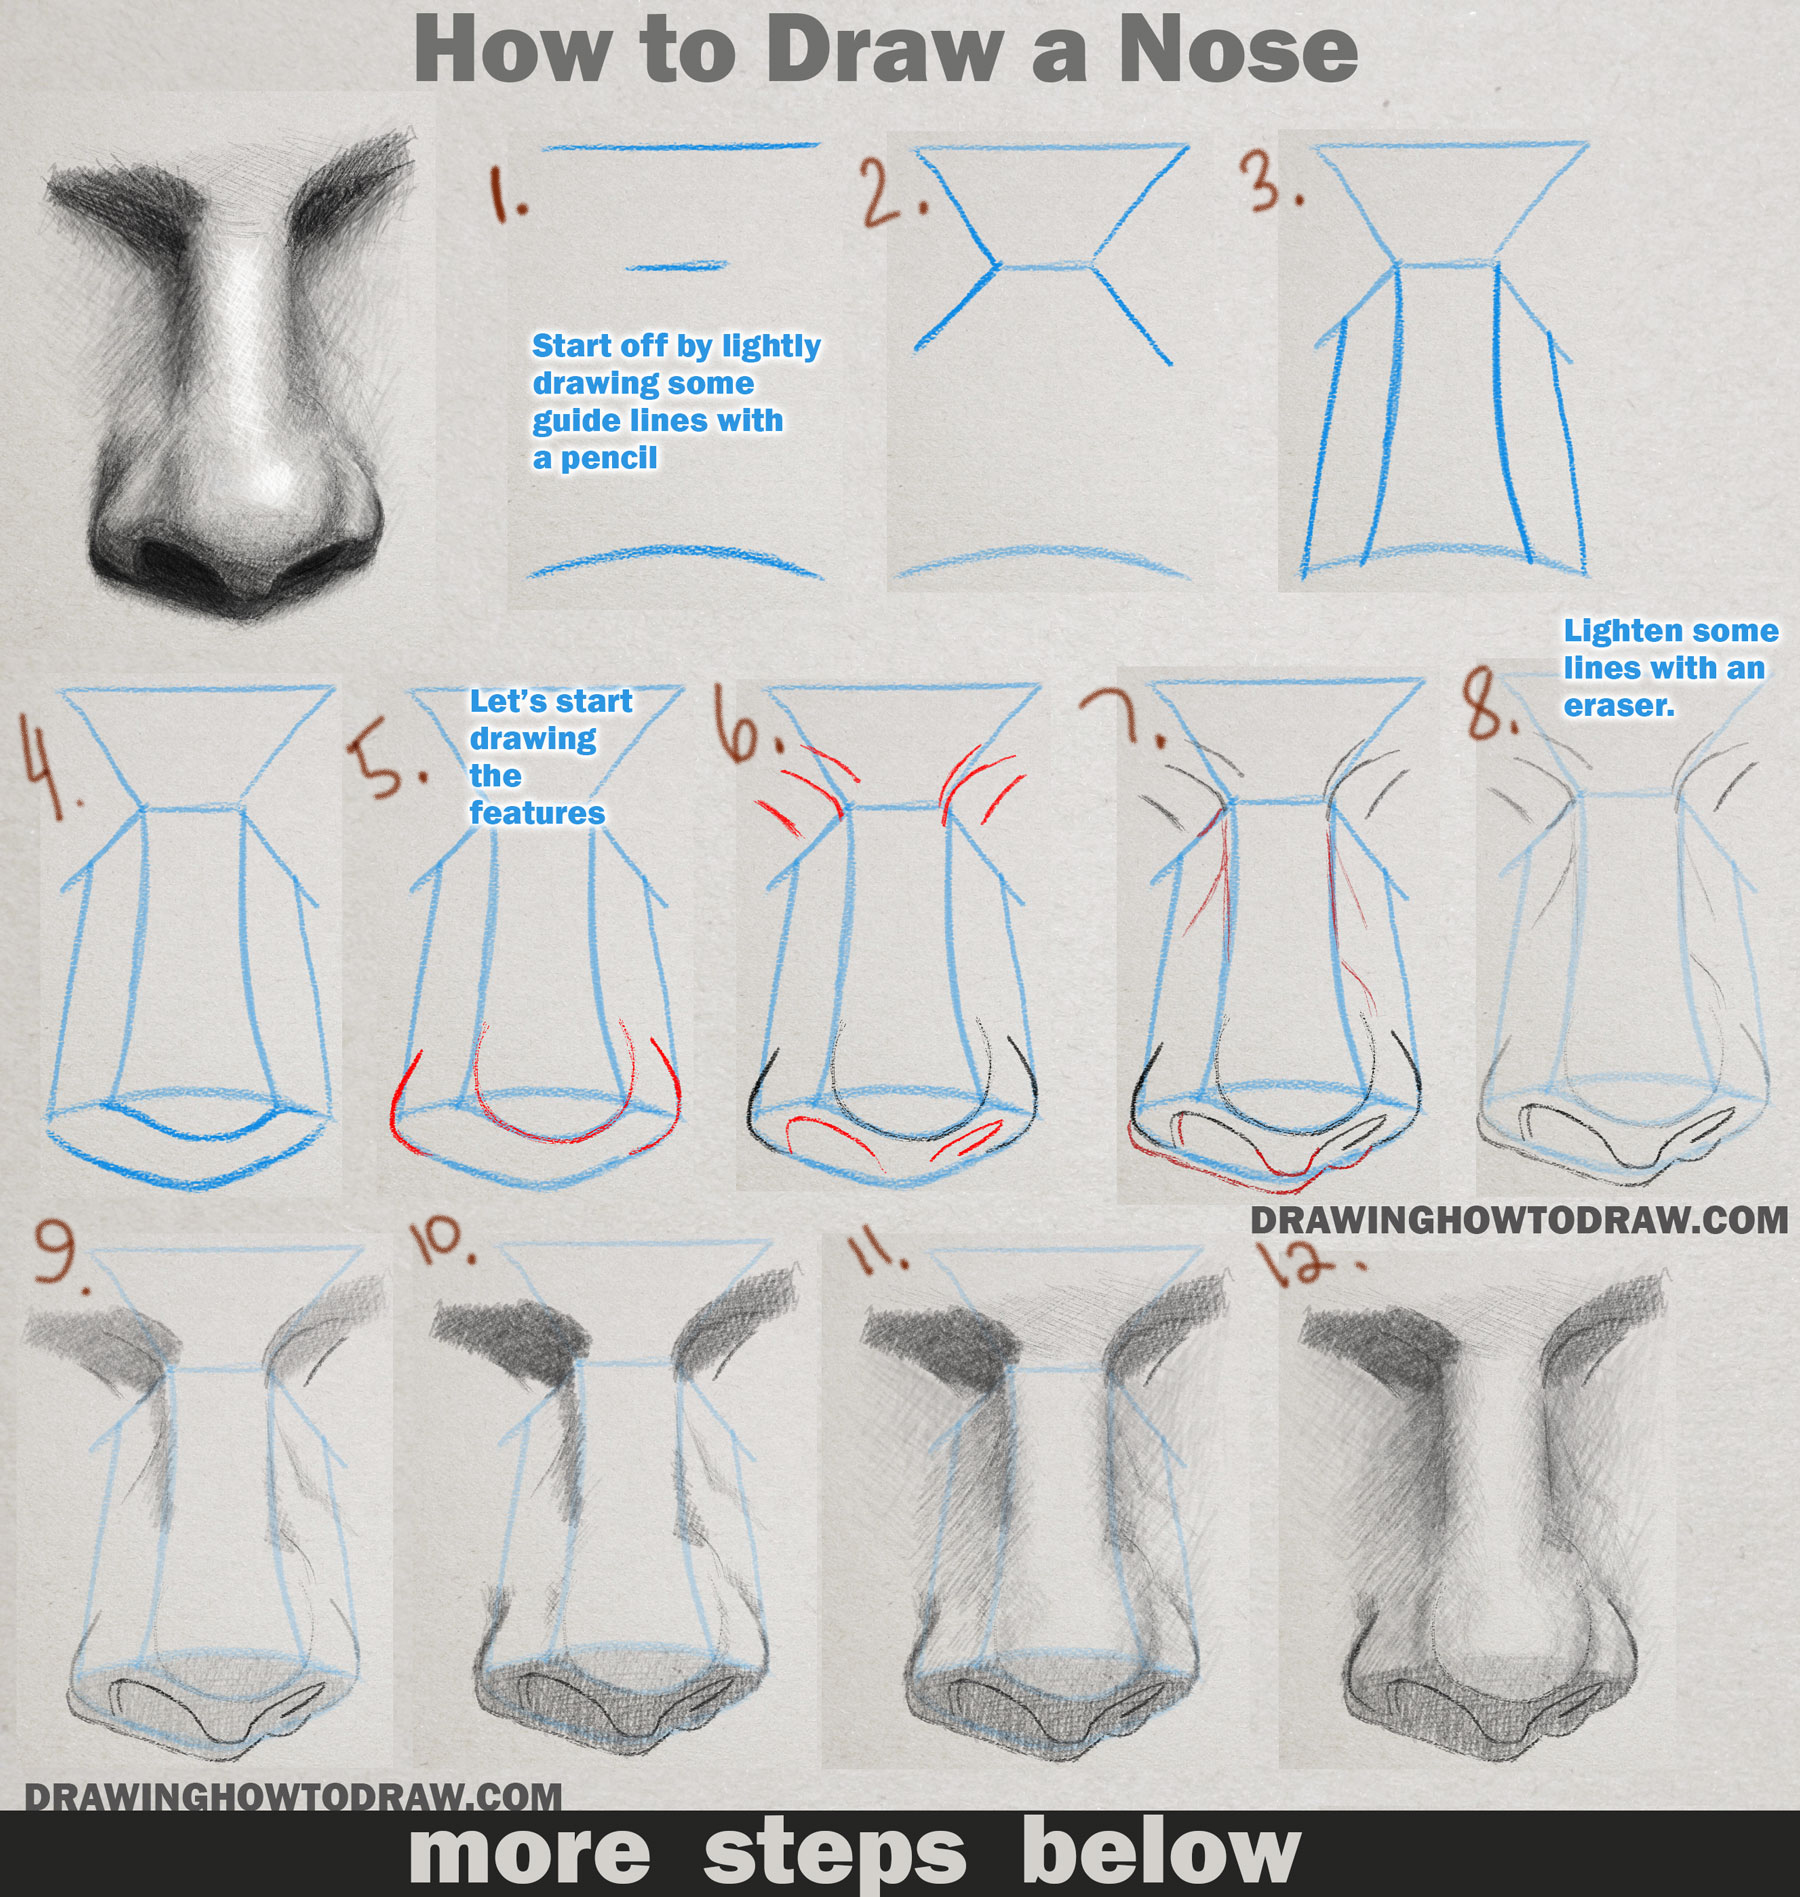 Learn How to Draw and Shade a Realistic Nose in Pencil or Graphite Easy Step by Step Tutorial